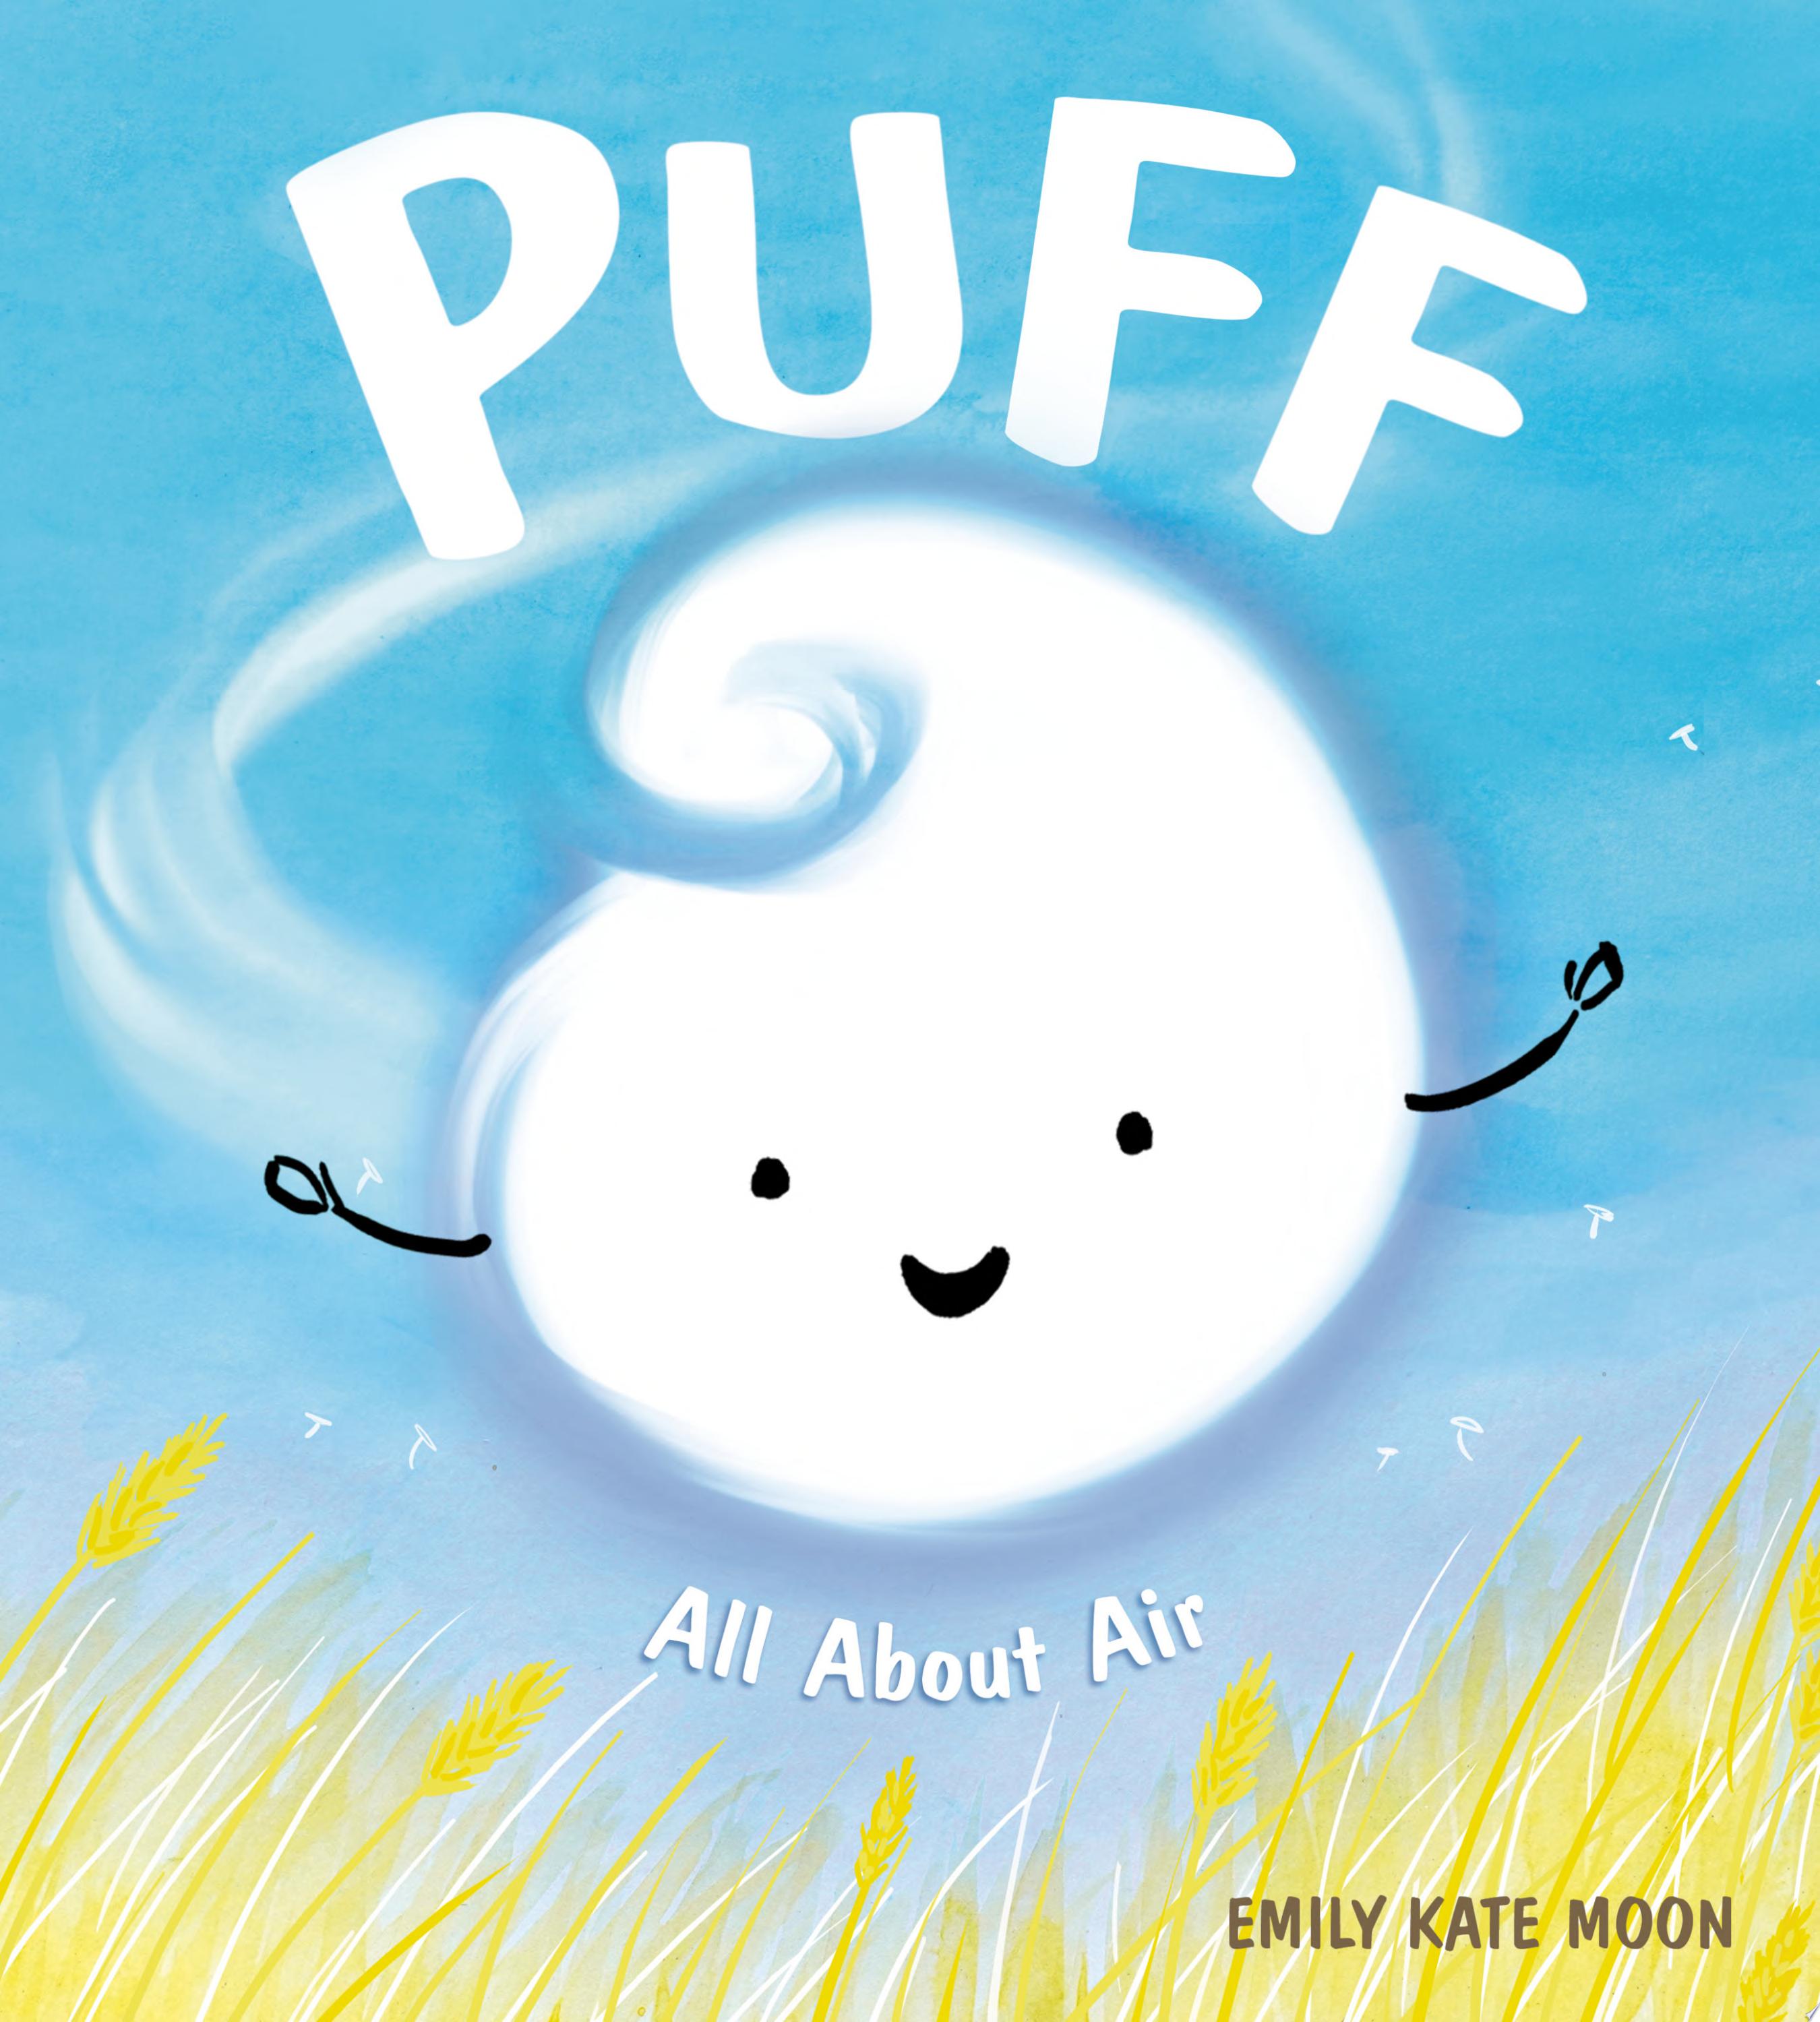 Image for "Puff"